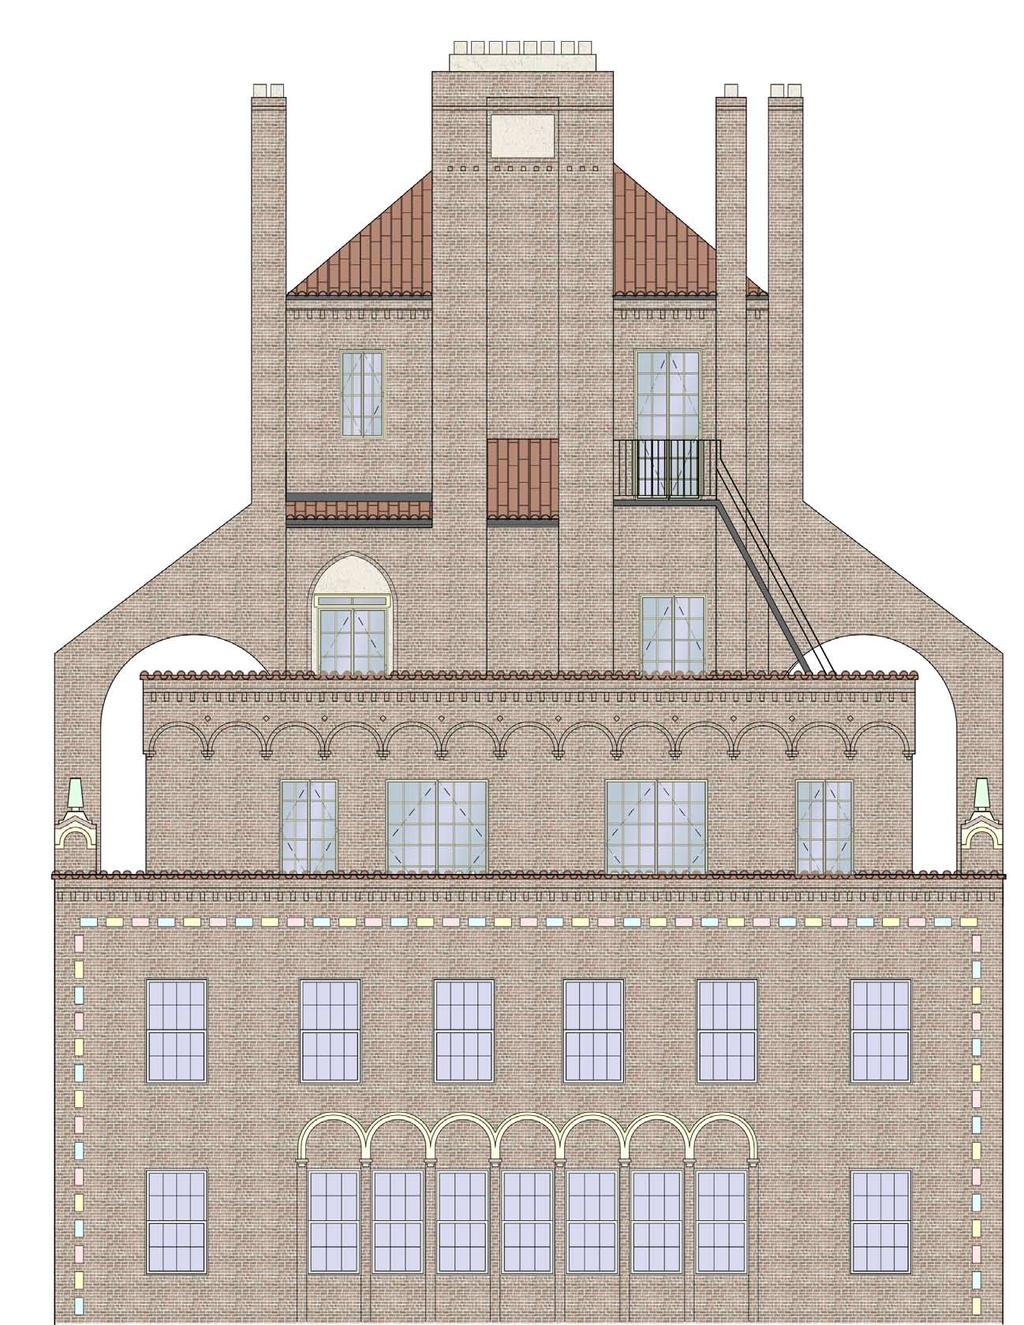 EXISTING WEST ELEVATION PROPOSED